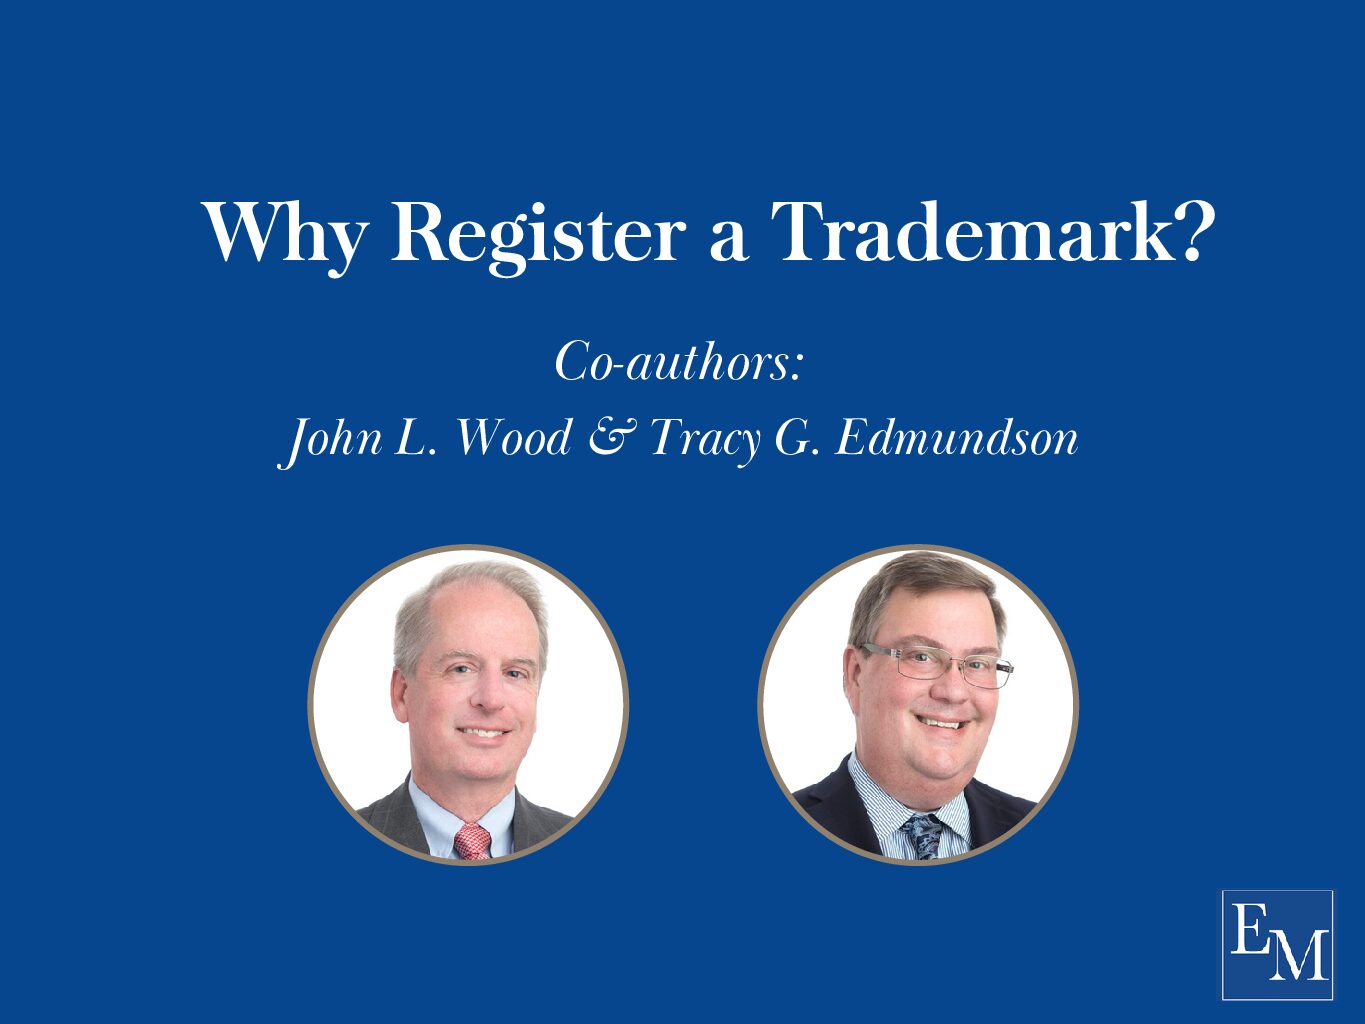 Why Register a Trademark?